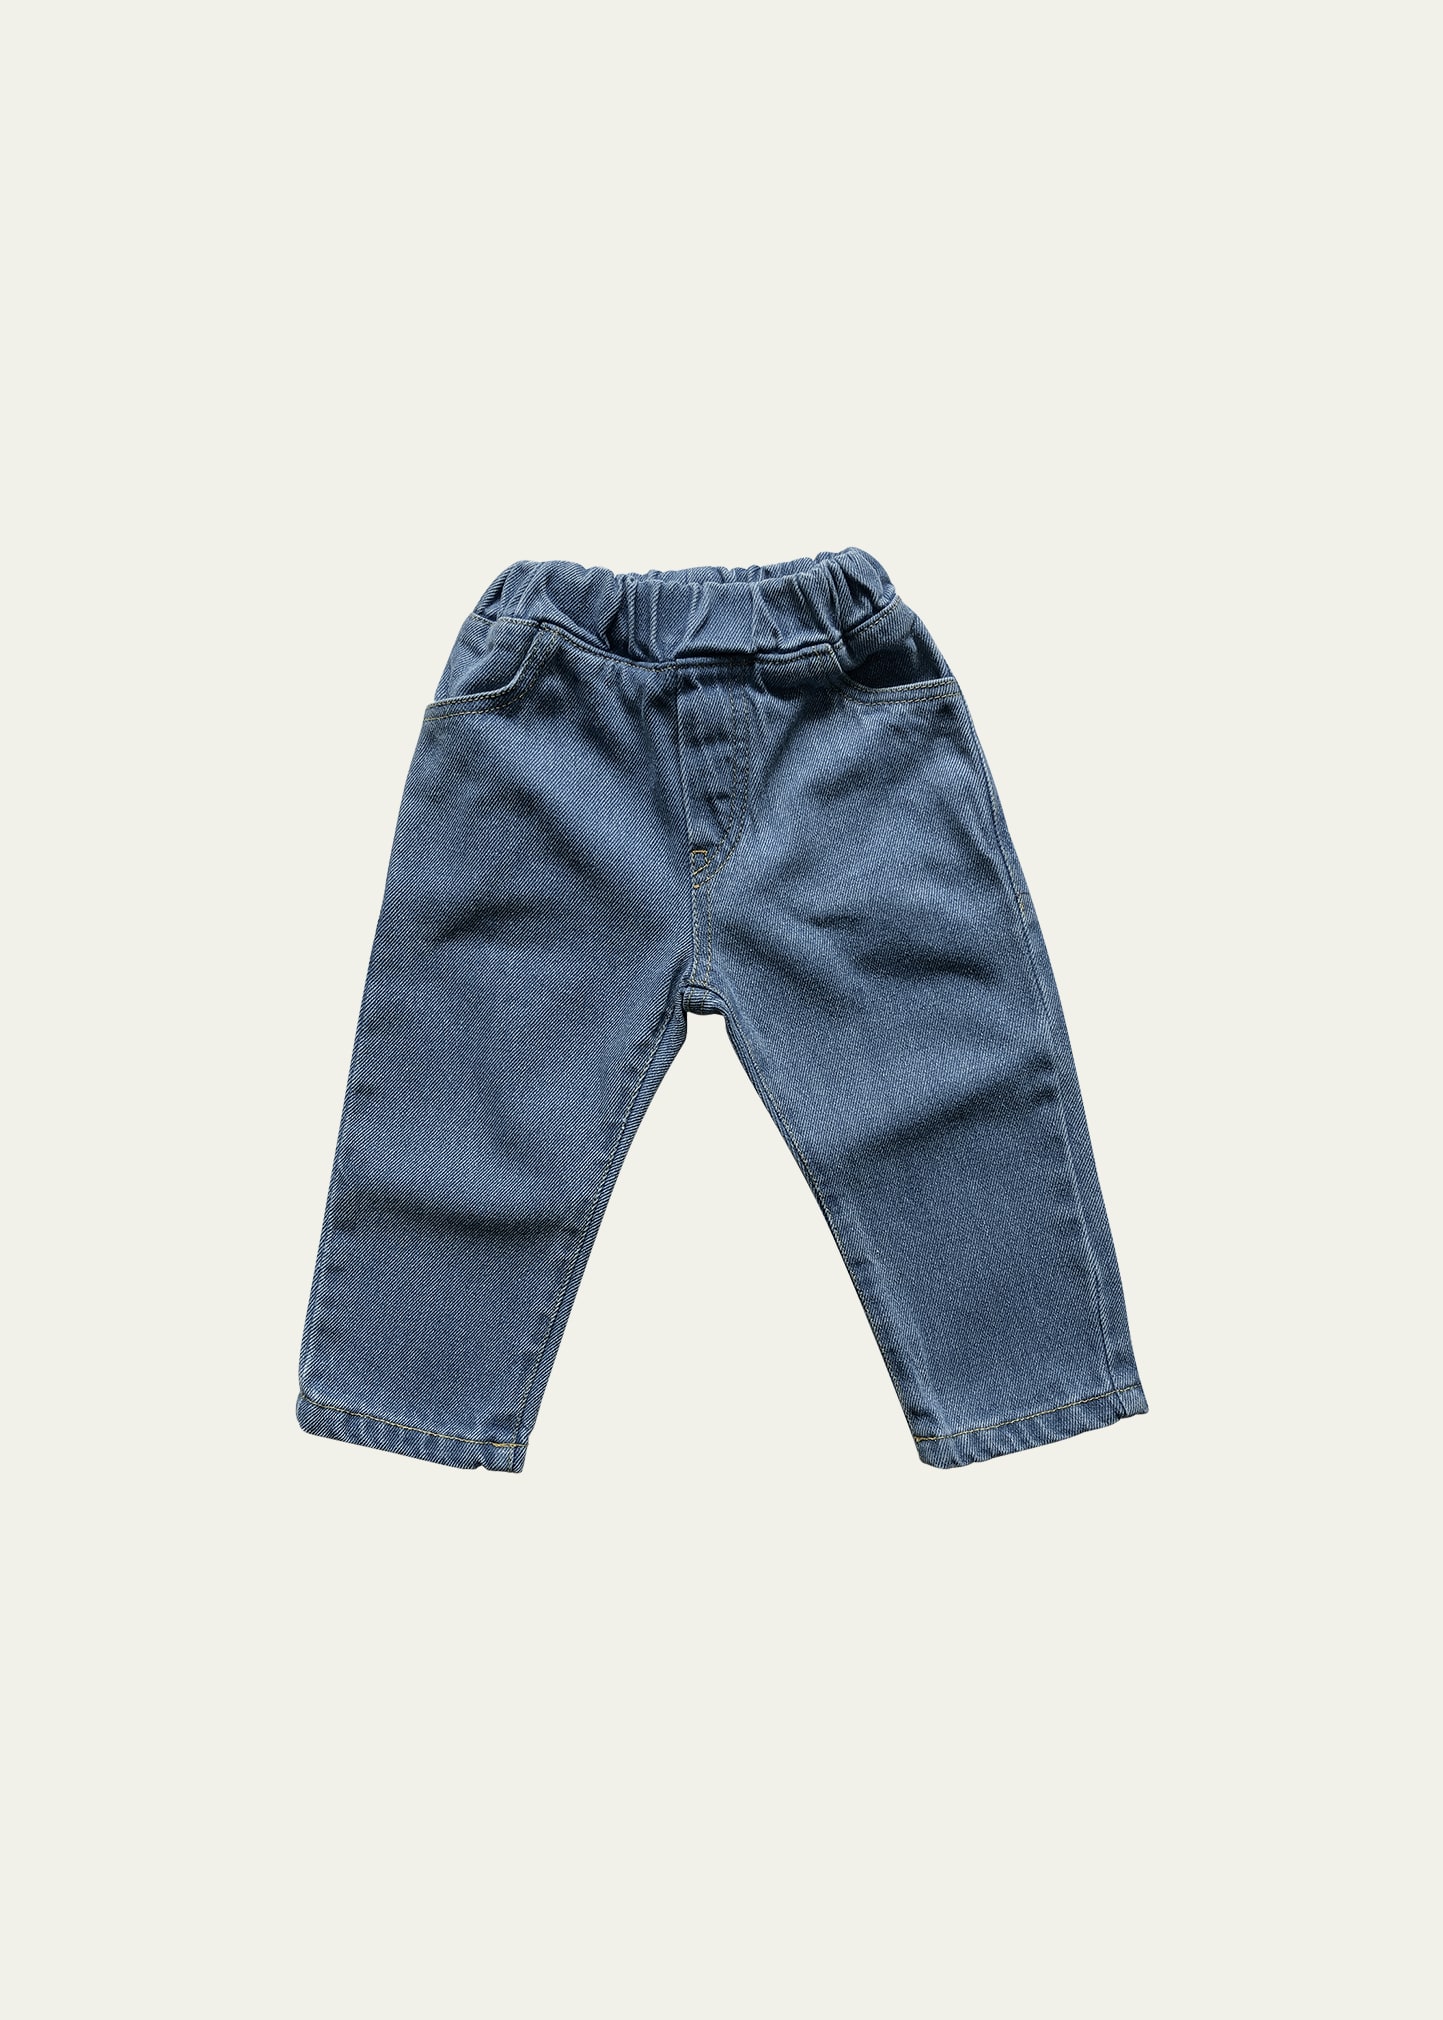 Kid's The Perfect Cotton Jean, Size 12M-10